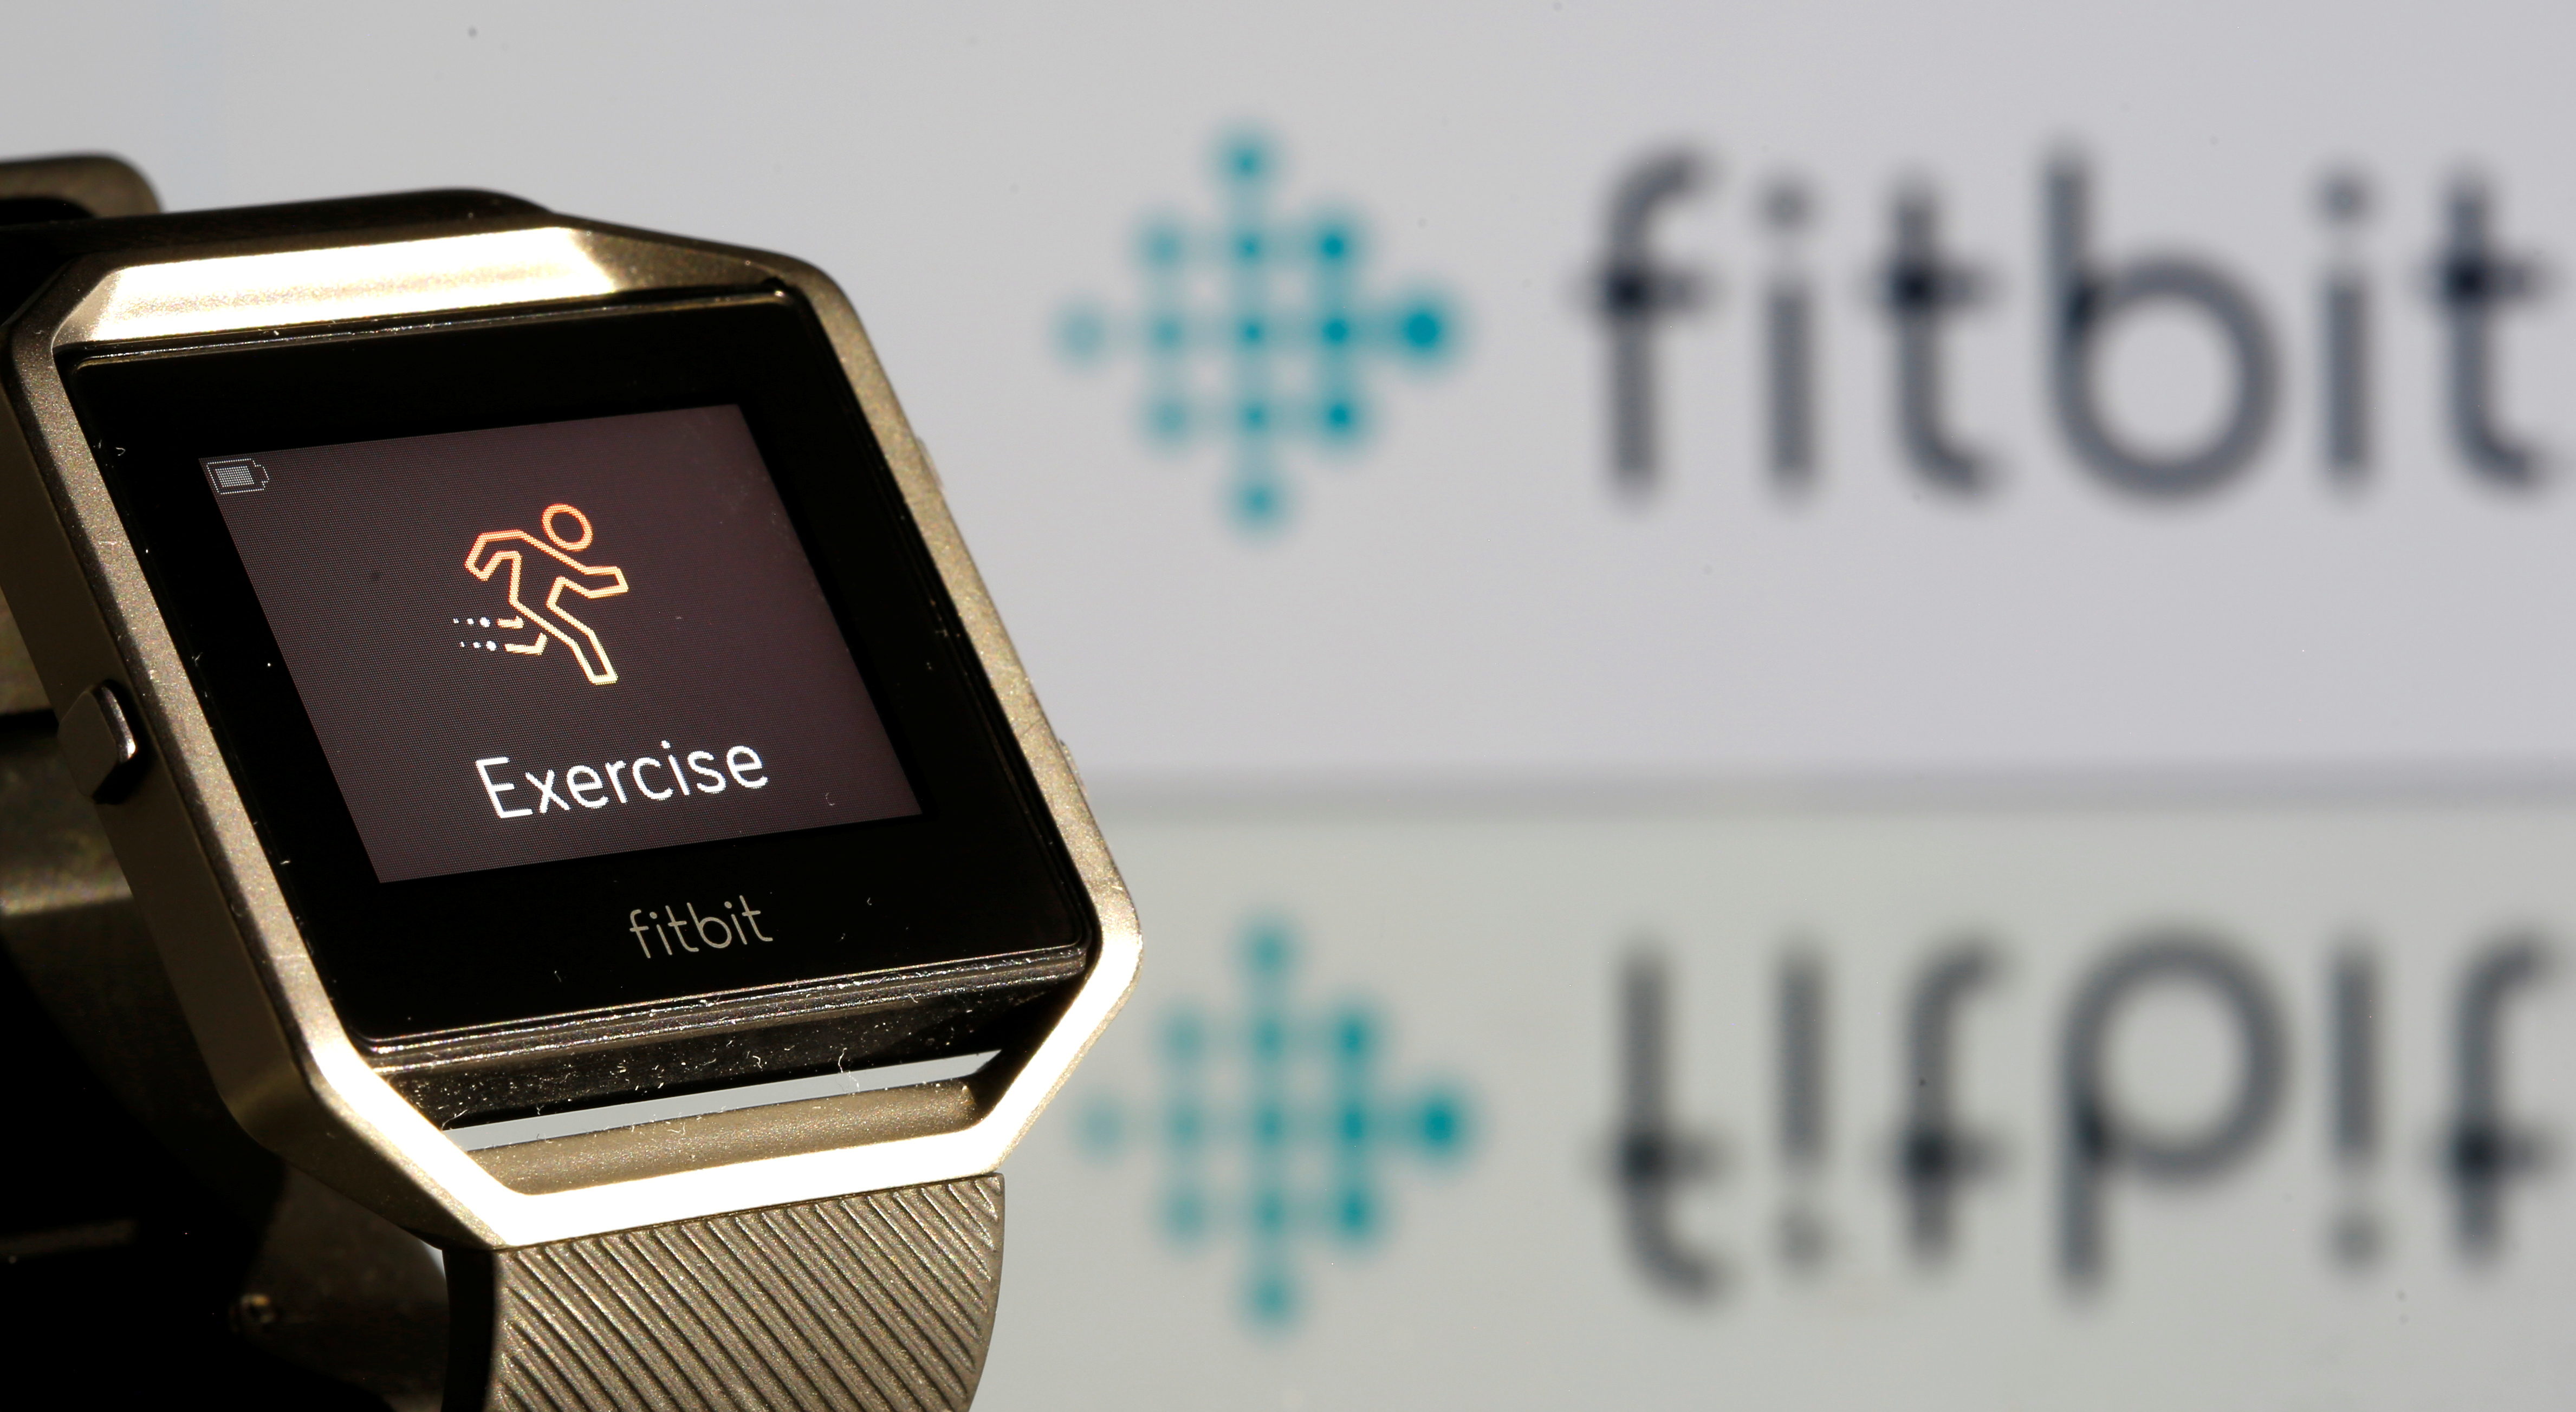 Fitbit Blaze watch is seen in front of a displayed Fitbit logo in this illustration